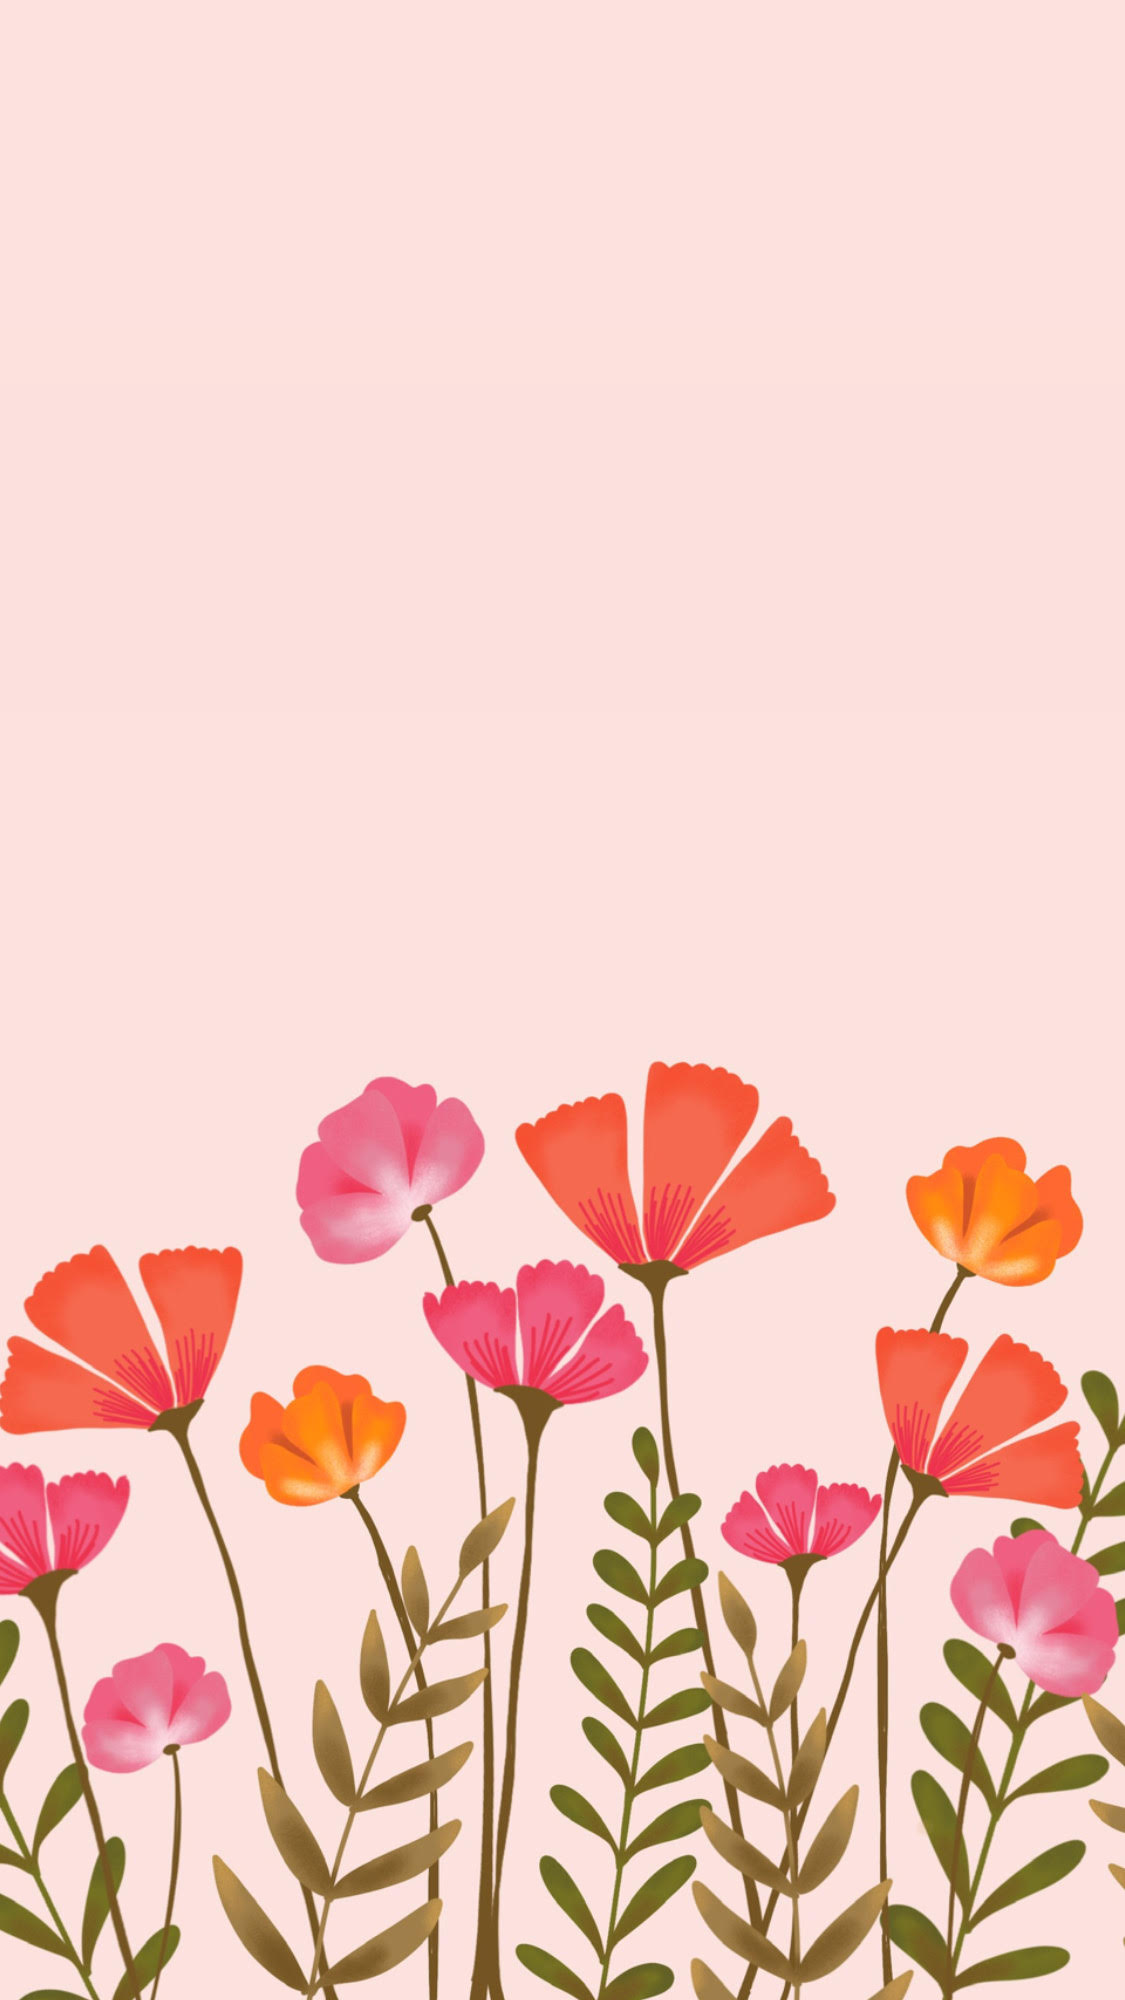 Image is a free phone wallpaper download with a blush background and digitally drawn flowers and leaves in shades of pink, orange, green, and brown.